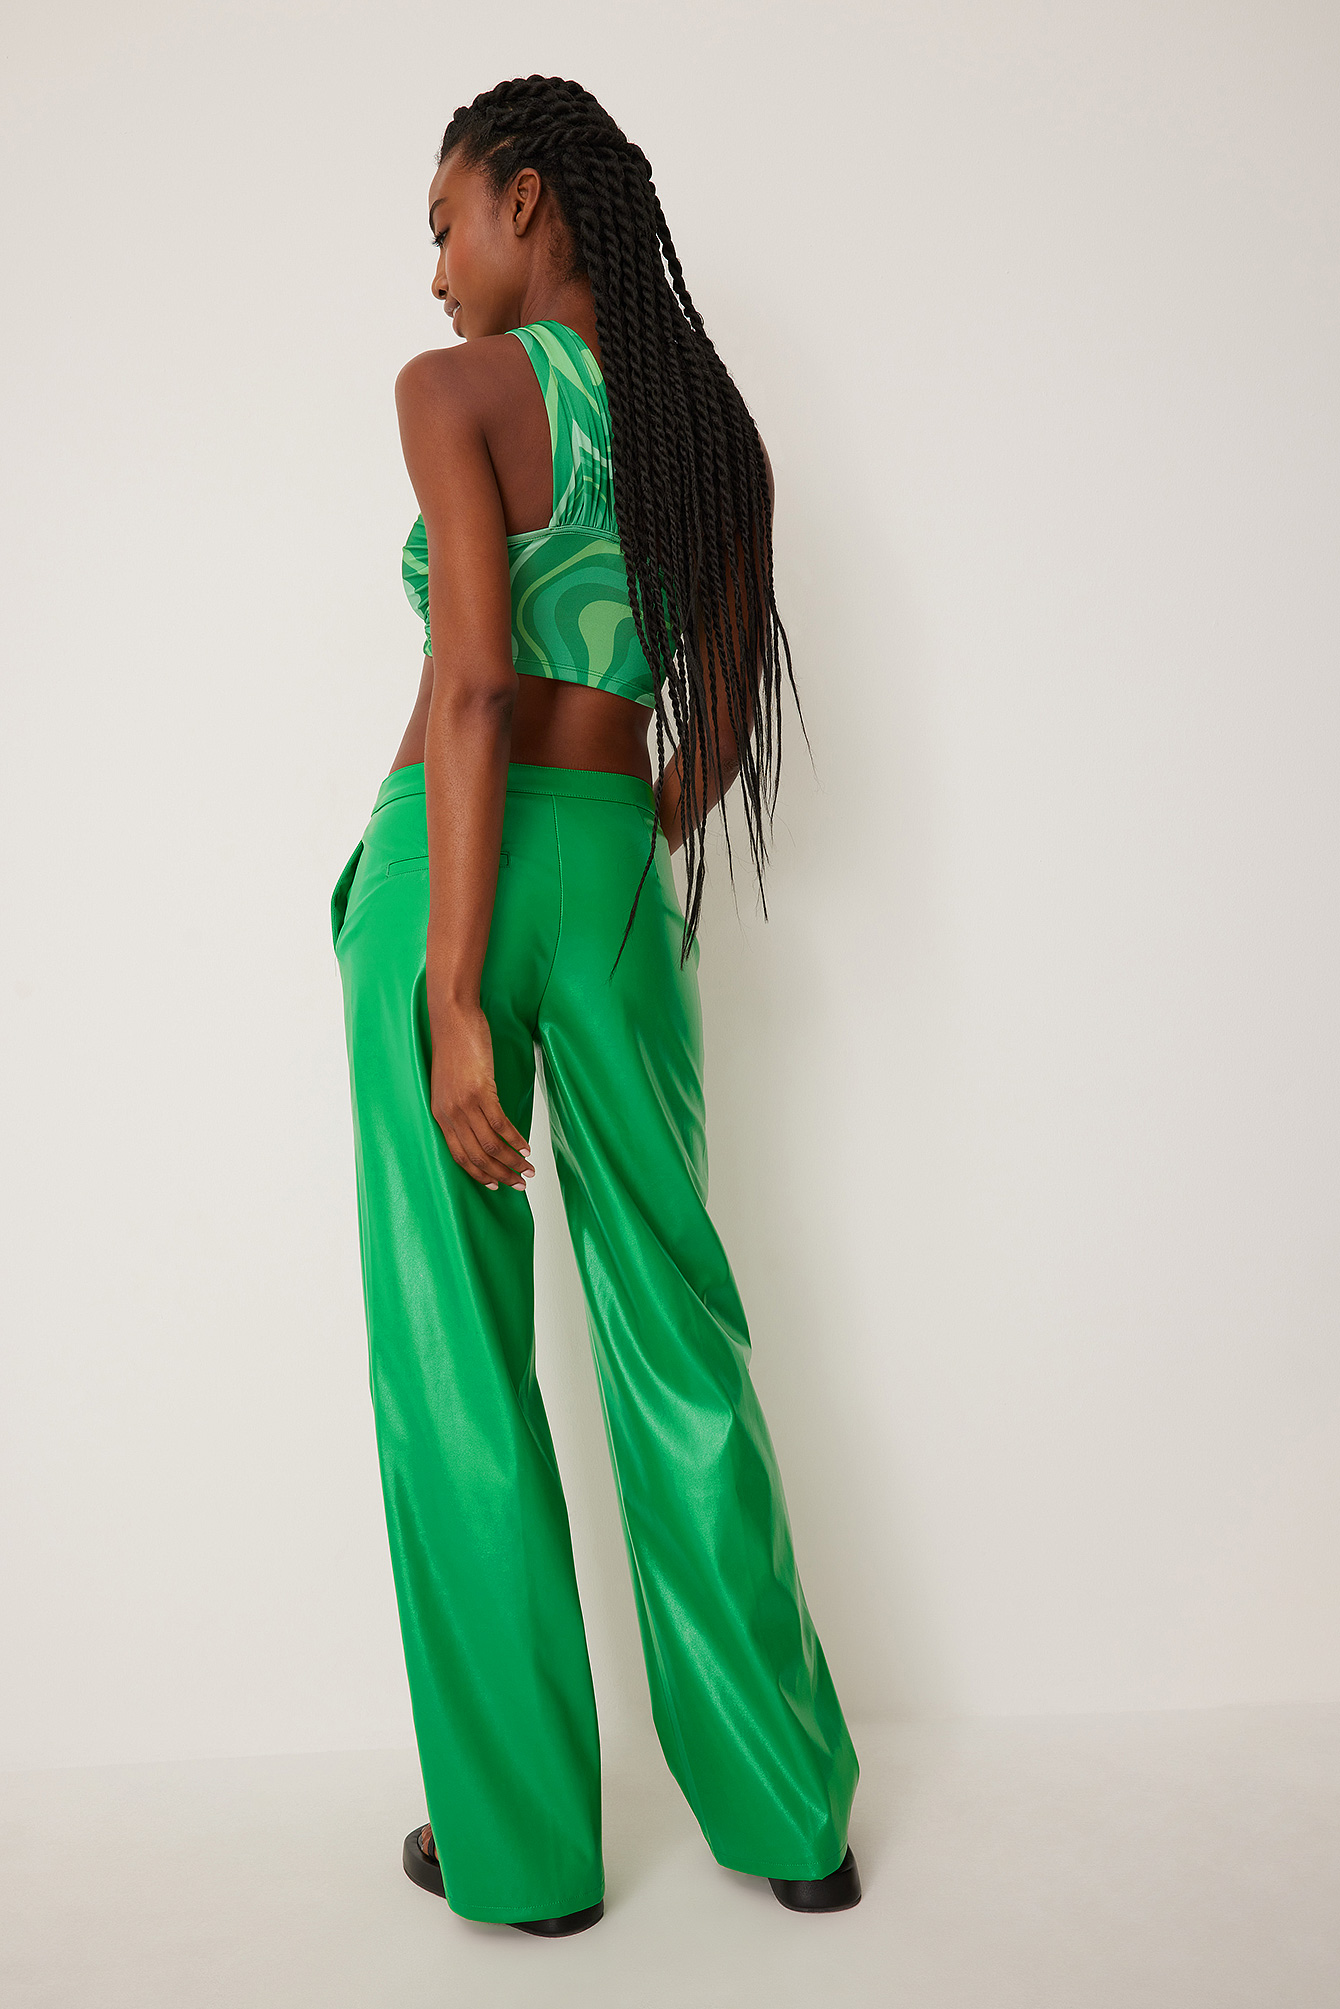 Green Leather Pants - Etsy